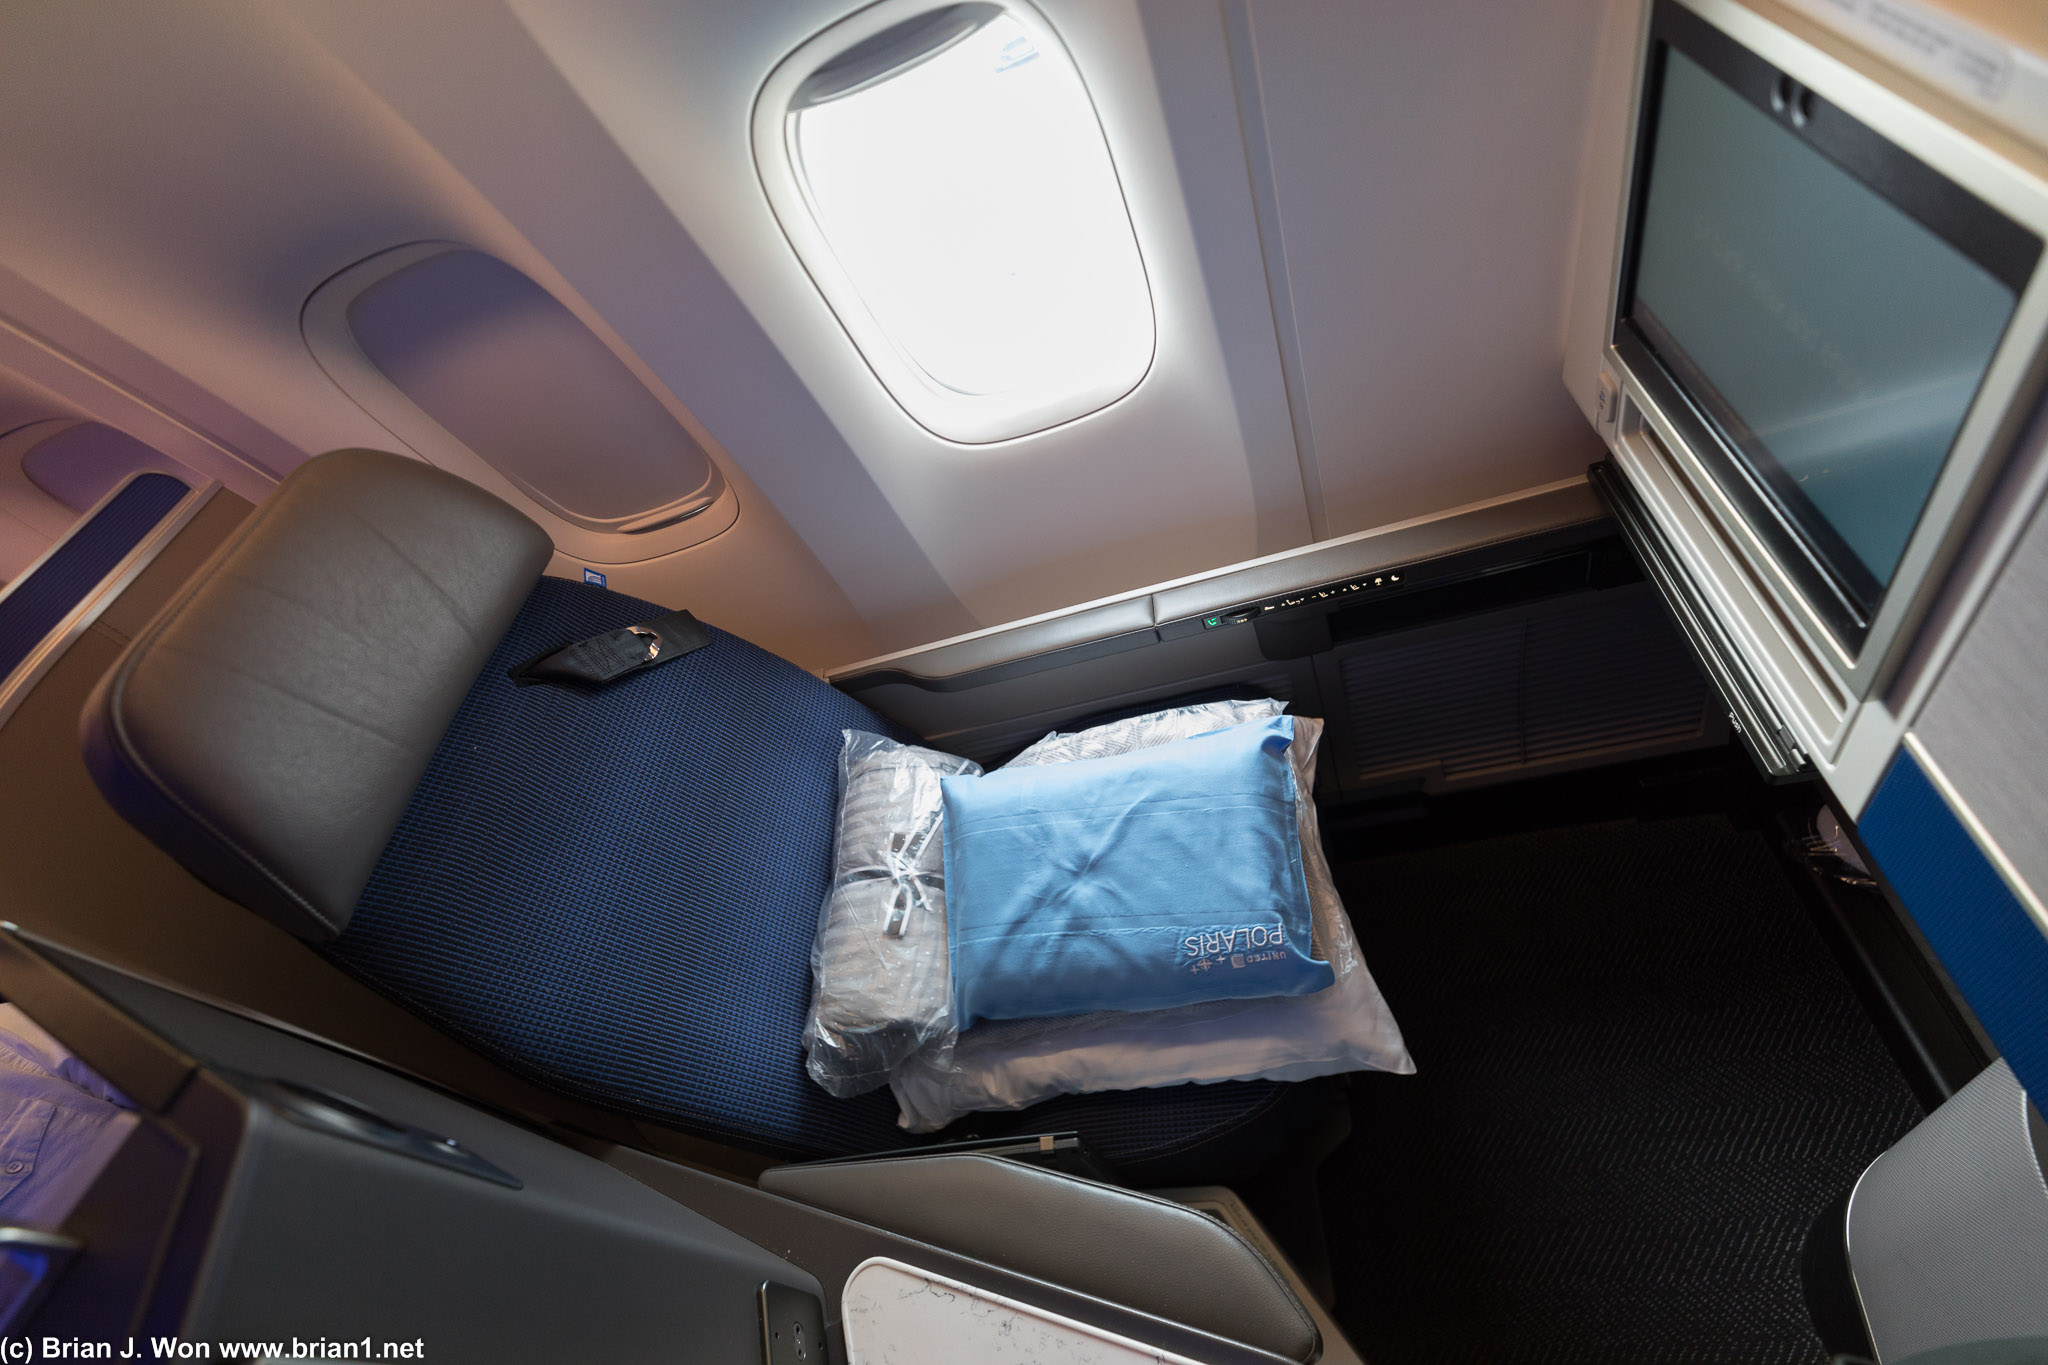 Still amazing to think United has a competitive business class product.